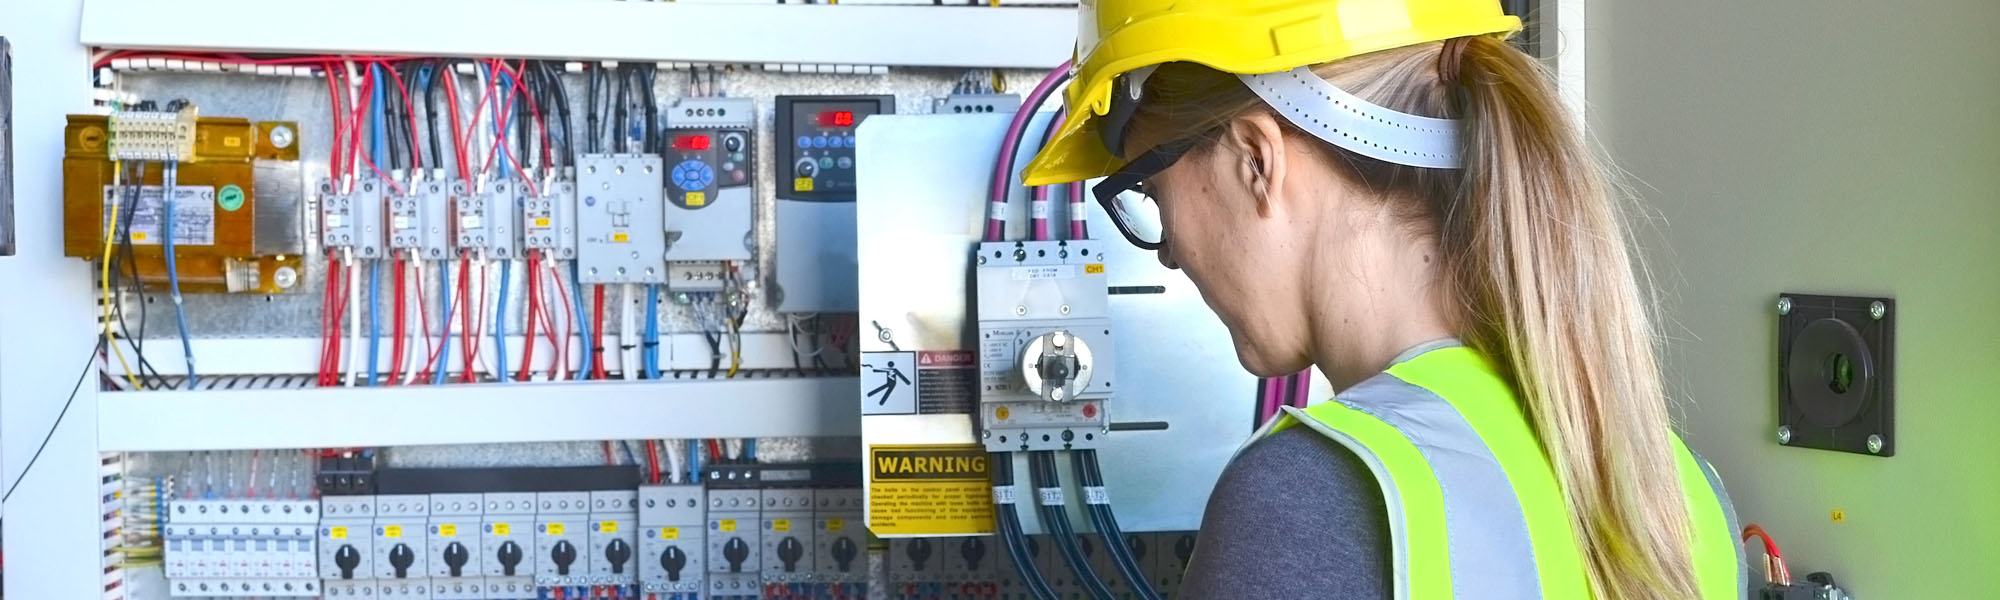 Female worker inspection electric panel